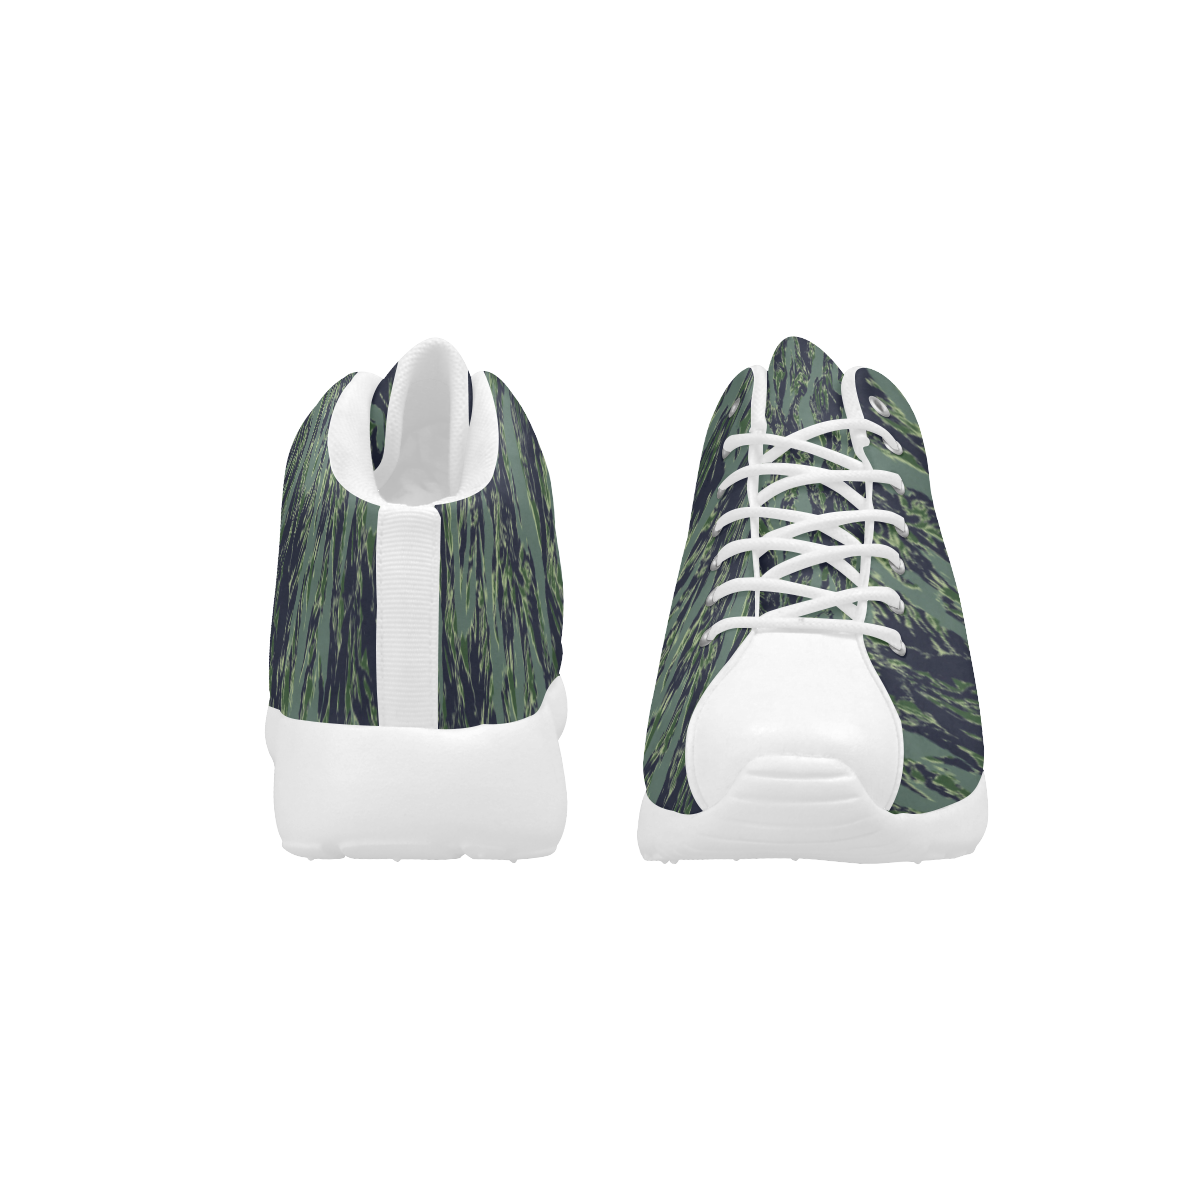 Jungle Tiger Stripe Green Camouflage Women's Basketball Training Shoes/Large Size (Model 47502)